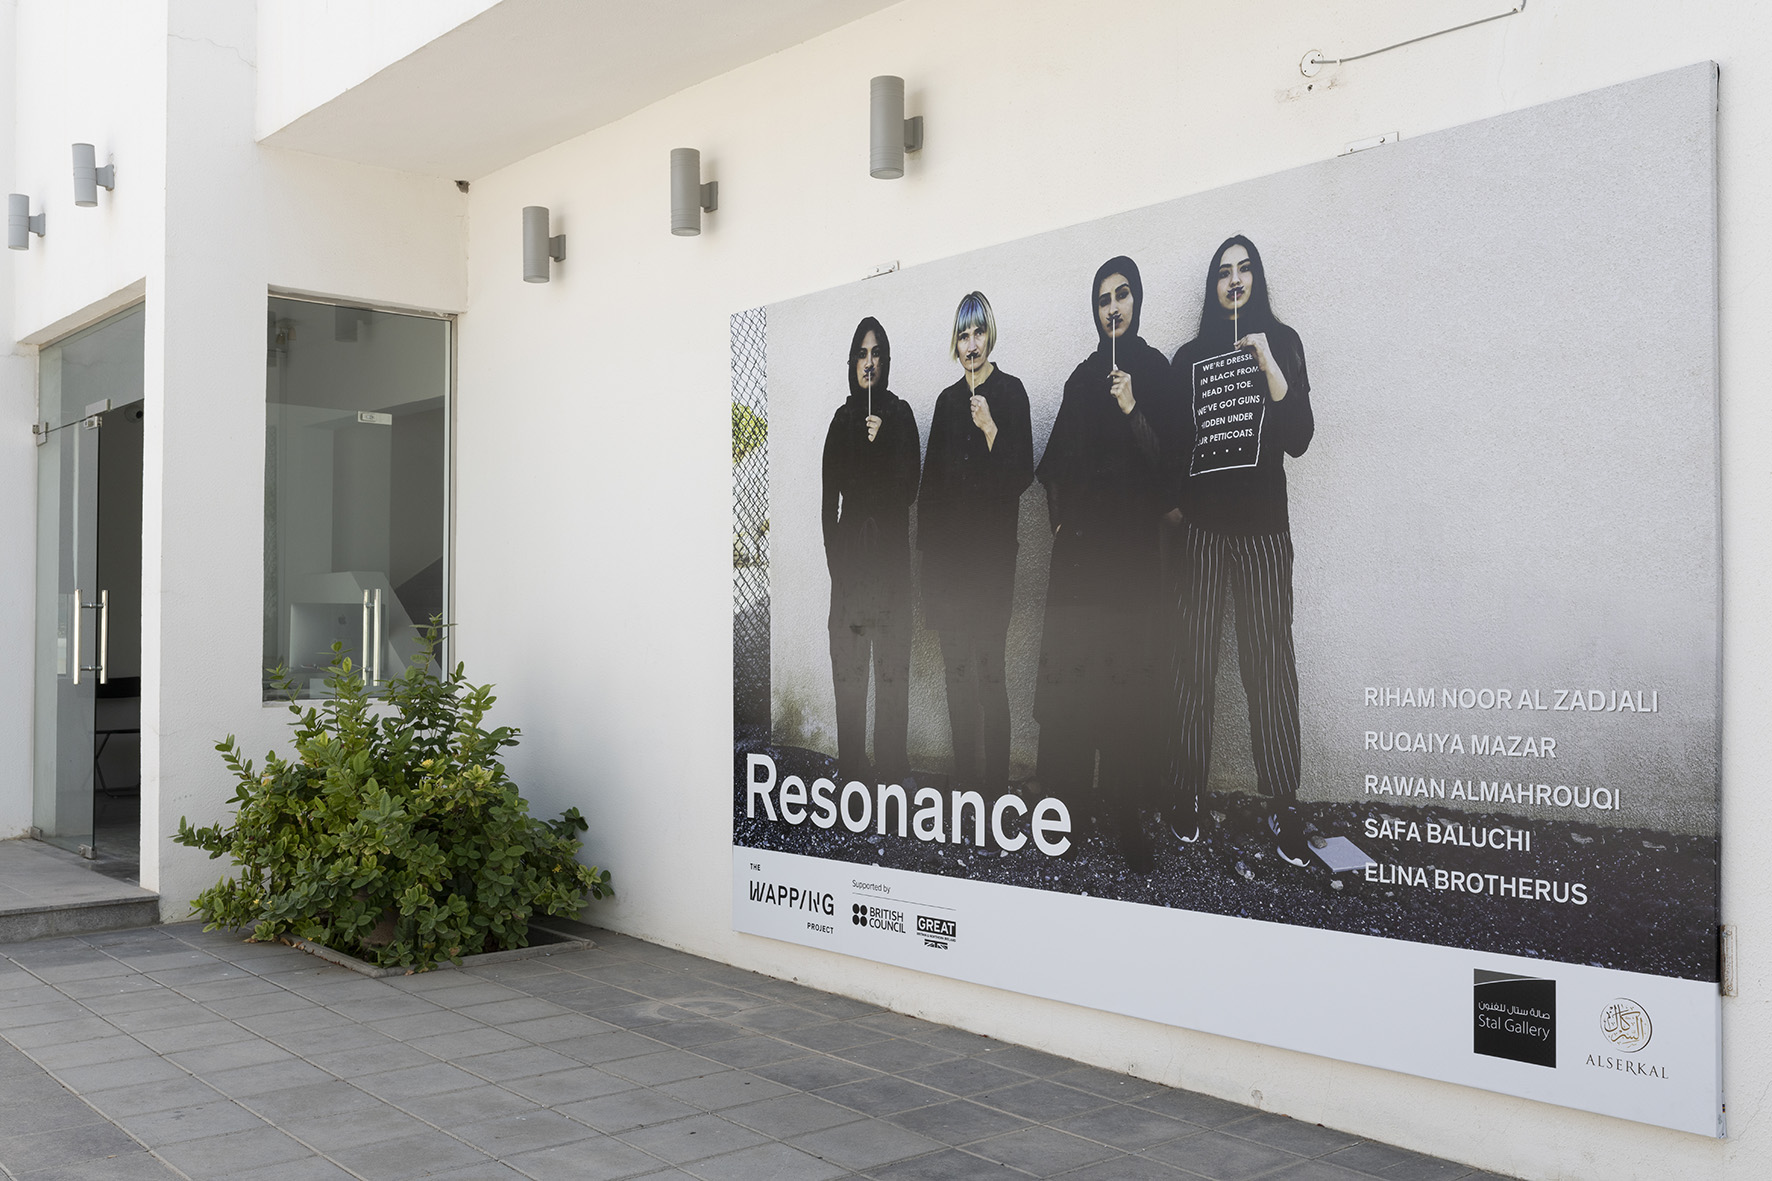 Resonance, exhibition, installation view at Stal Gallery, Muscat, Oman, 2020